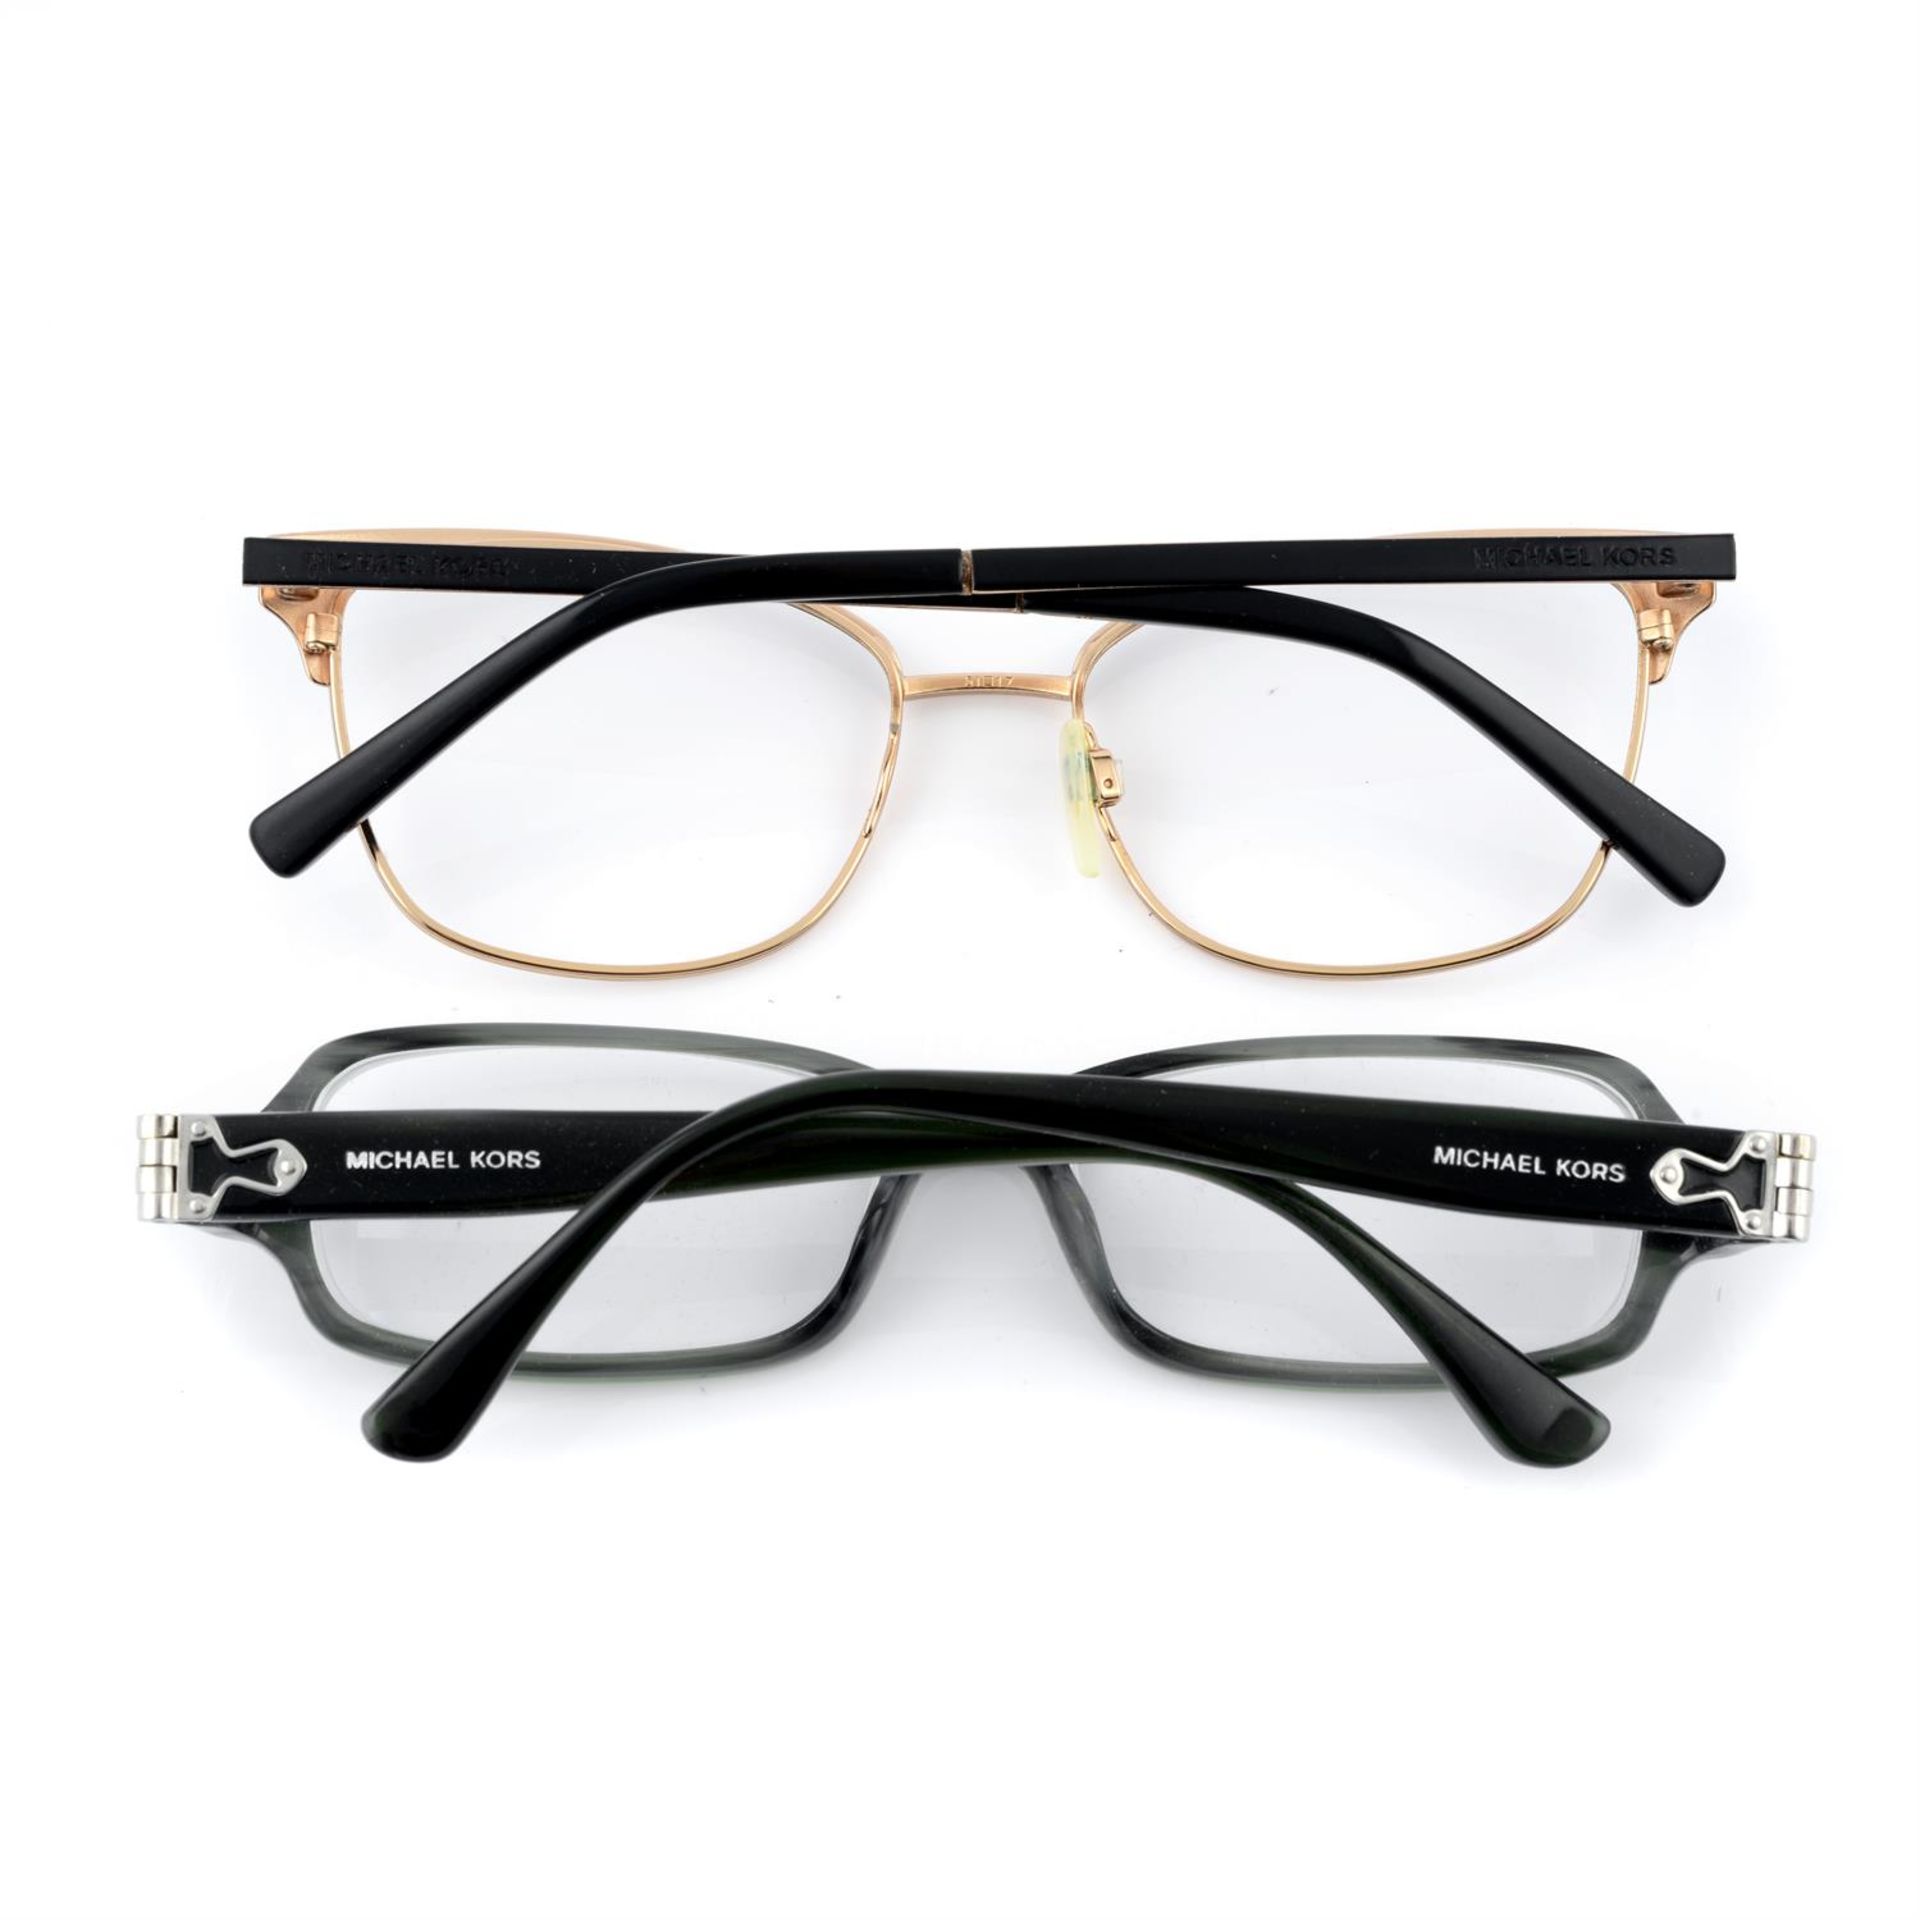 MICHAEL KORS - two pairs of prescription glasses (af). - Image 2 of 3